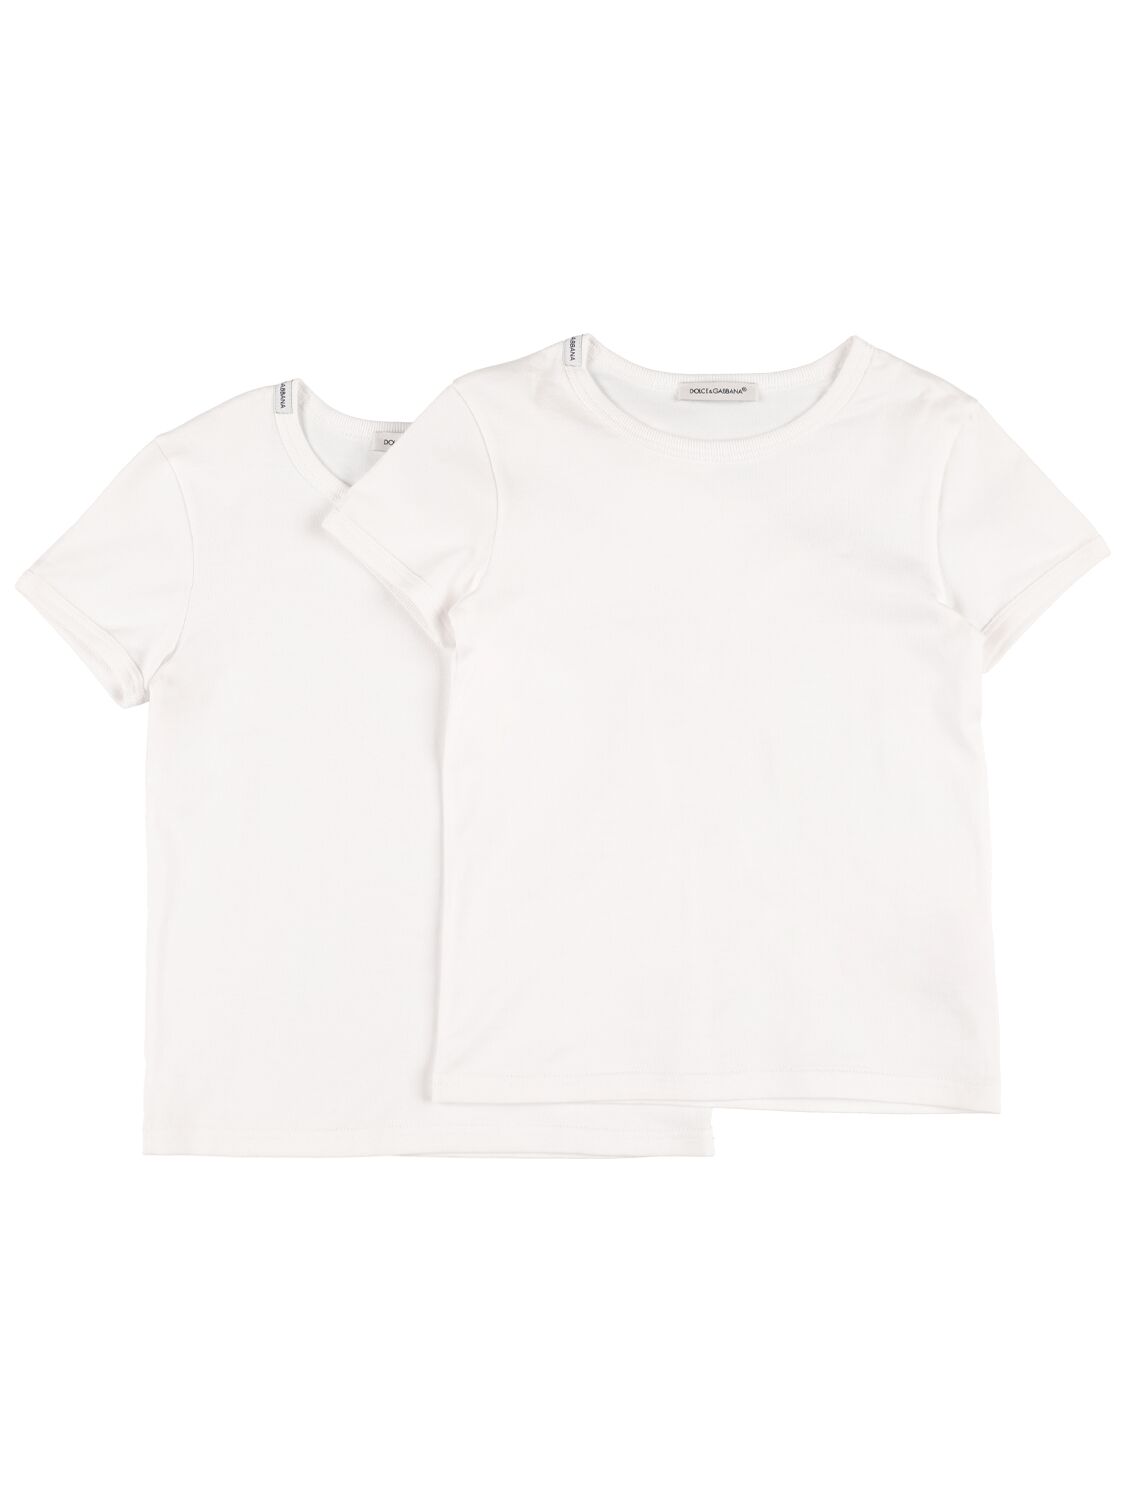 Dolce & Gabbana Kids' Pack Of 2 Cotton Jersey T-shirts In White